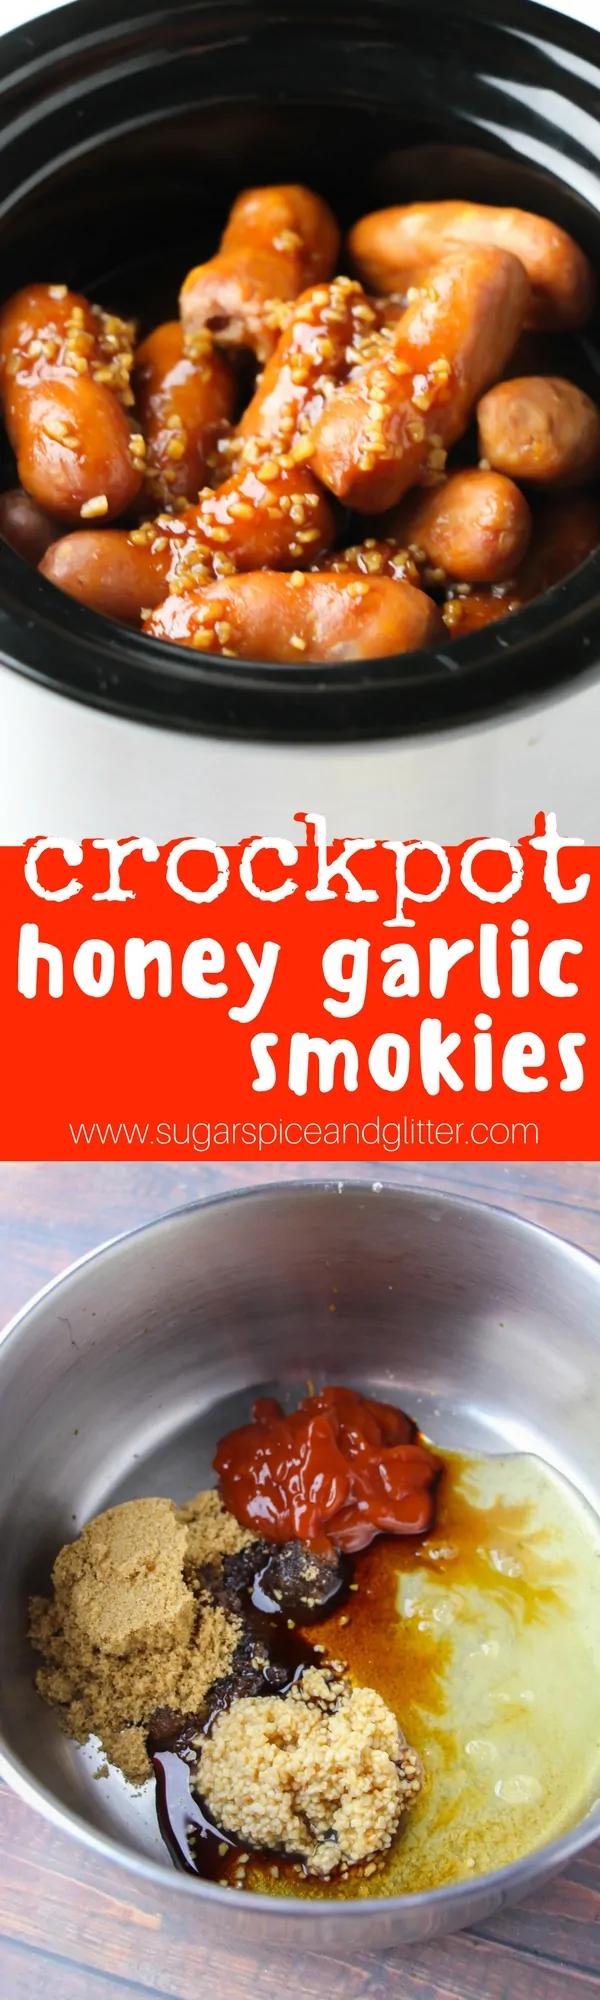 An easy crockpot sausage appetizer recipe, these Crockpot Honey Garlic Smokies are a sweet and smoky sausage recipe for tailgating or fall parties